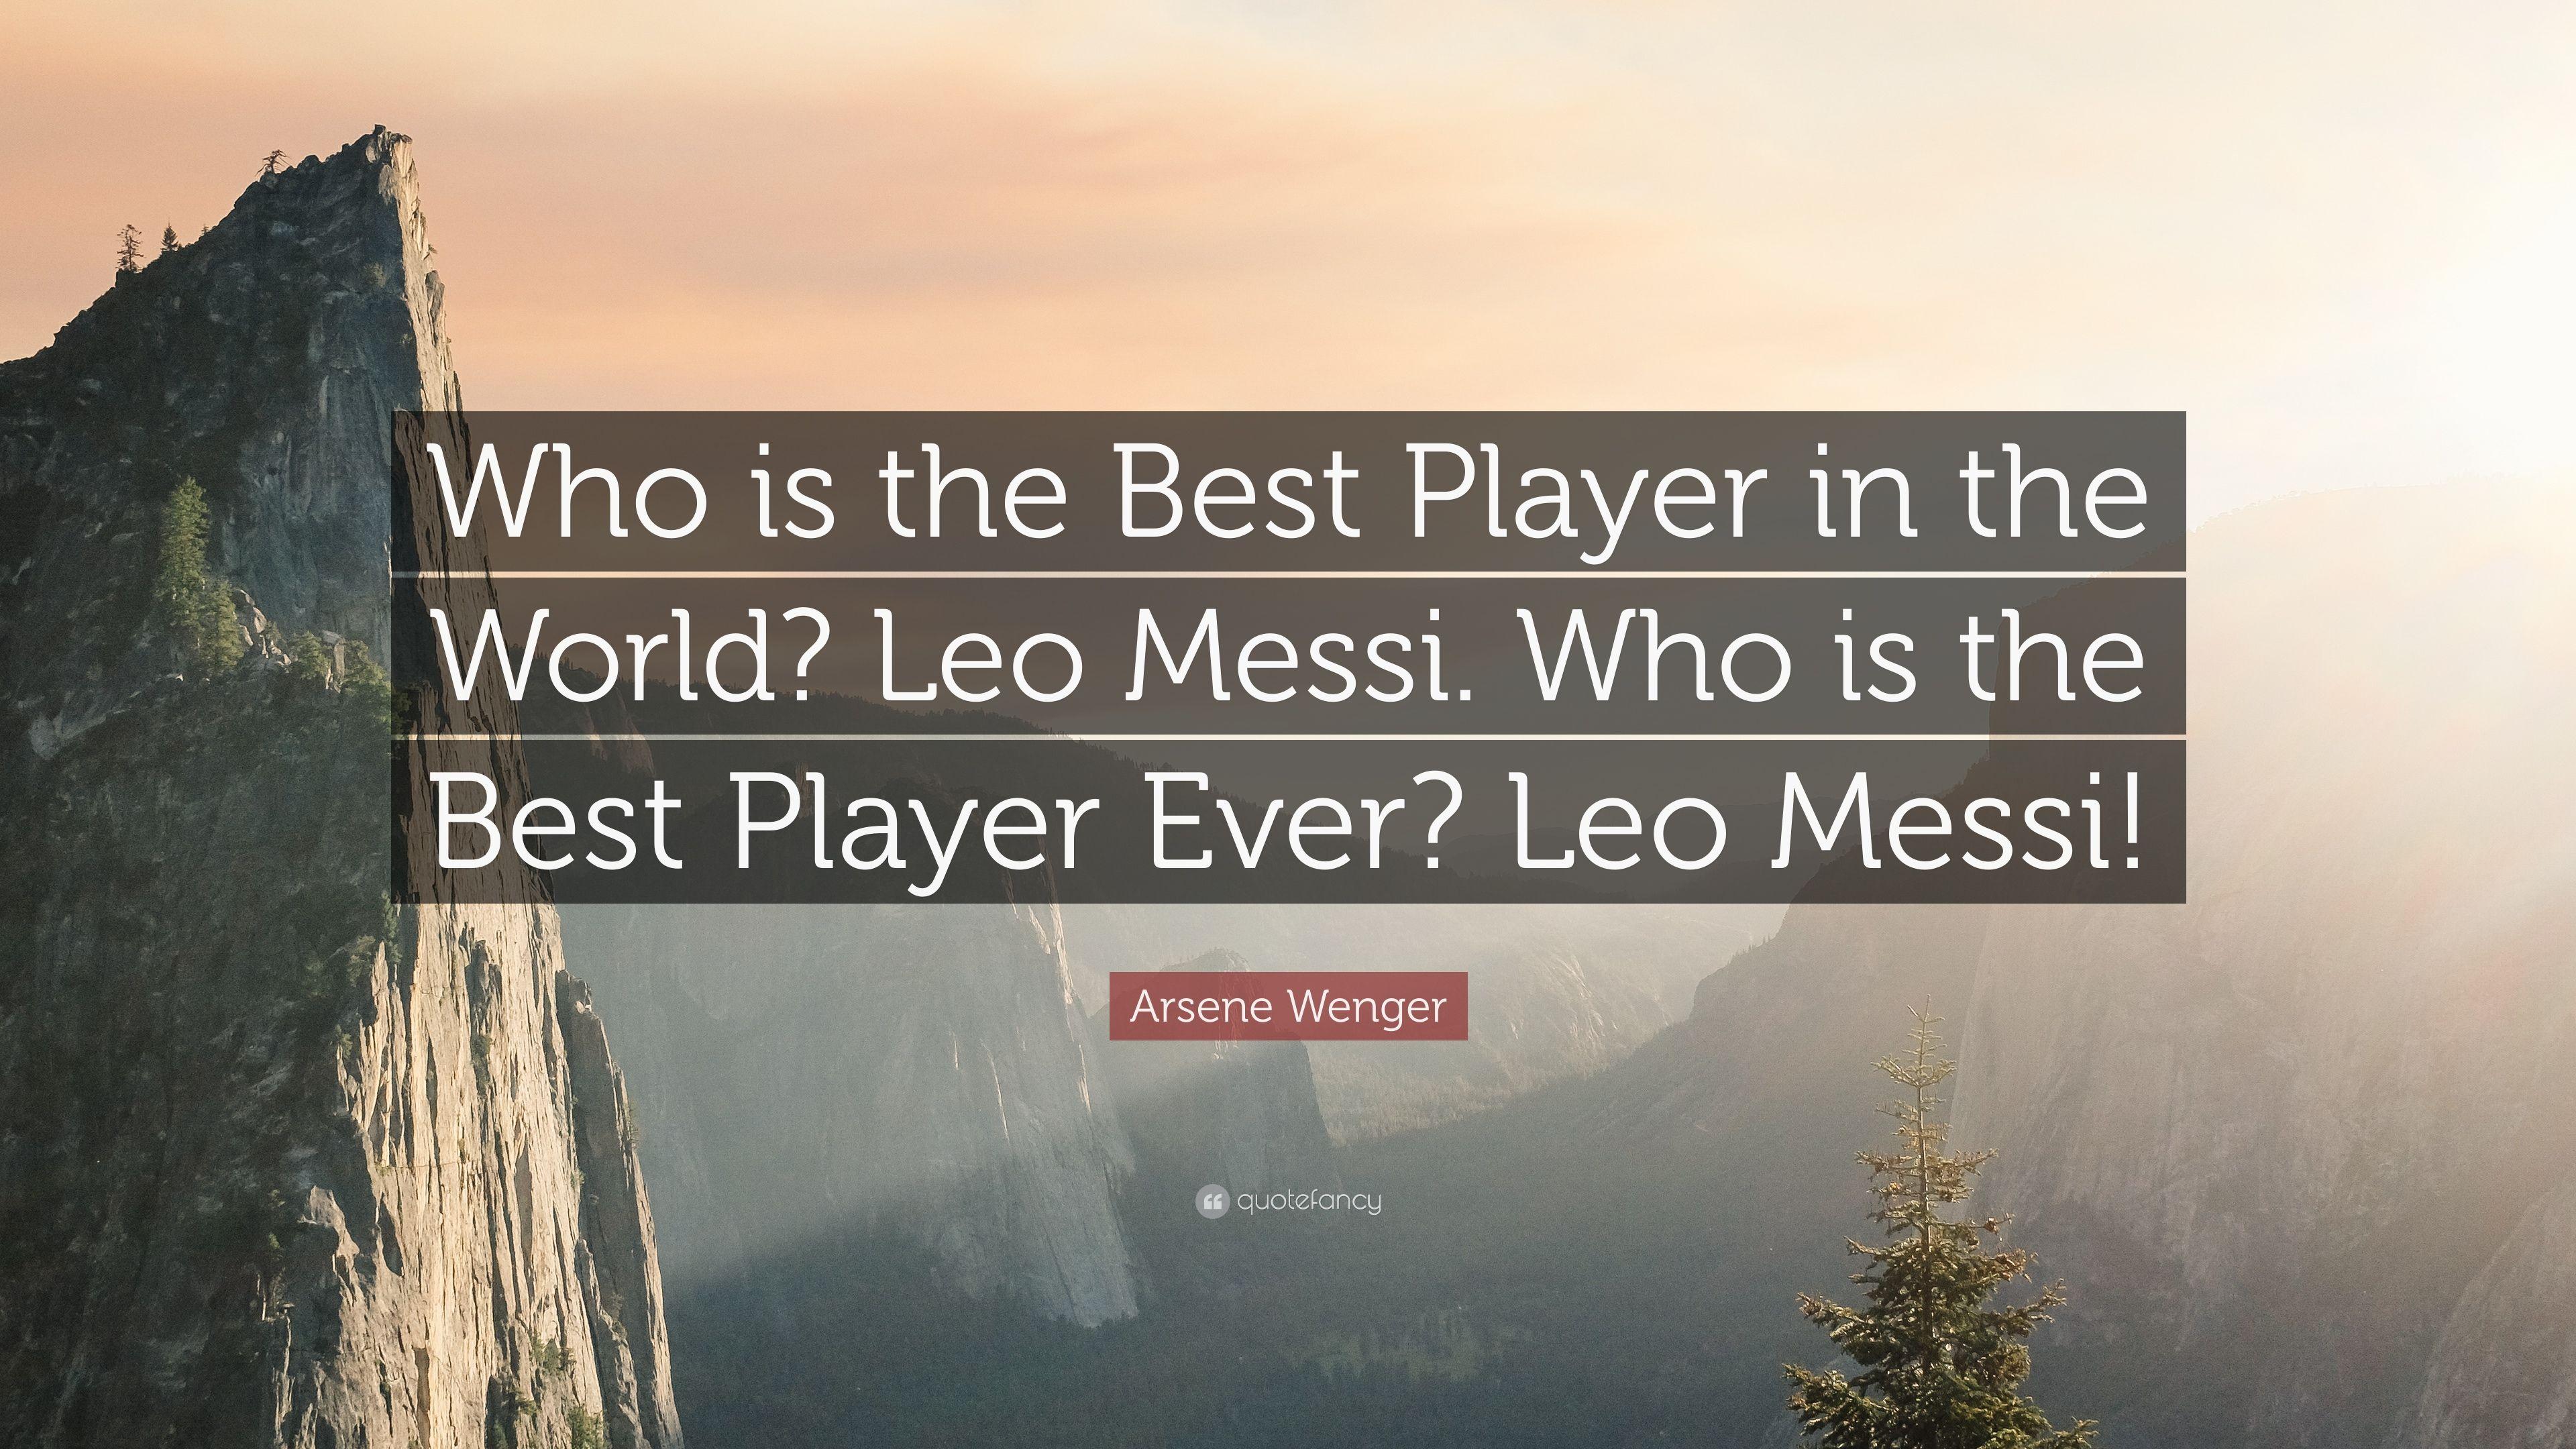 Arsene Wenger Quote: “Who is the Best Player in the World? Leo